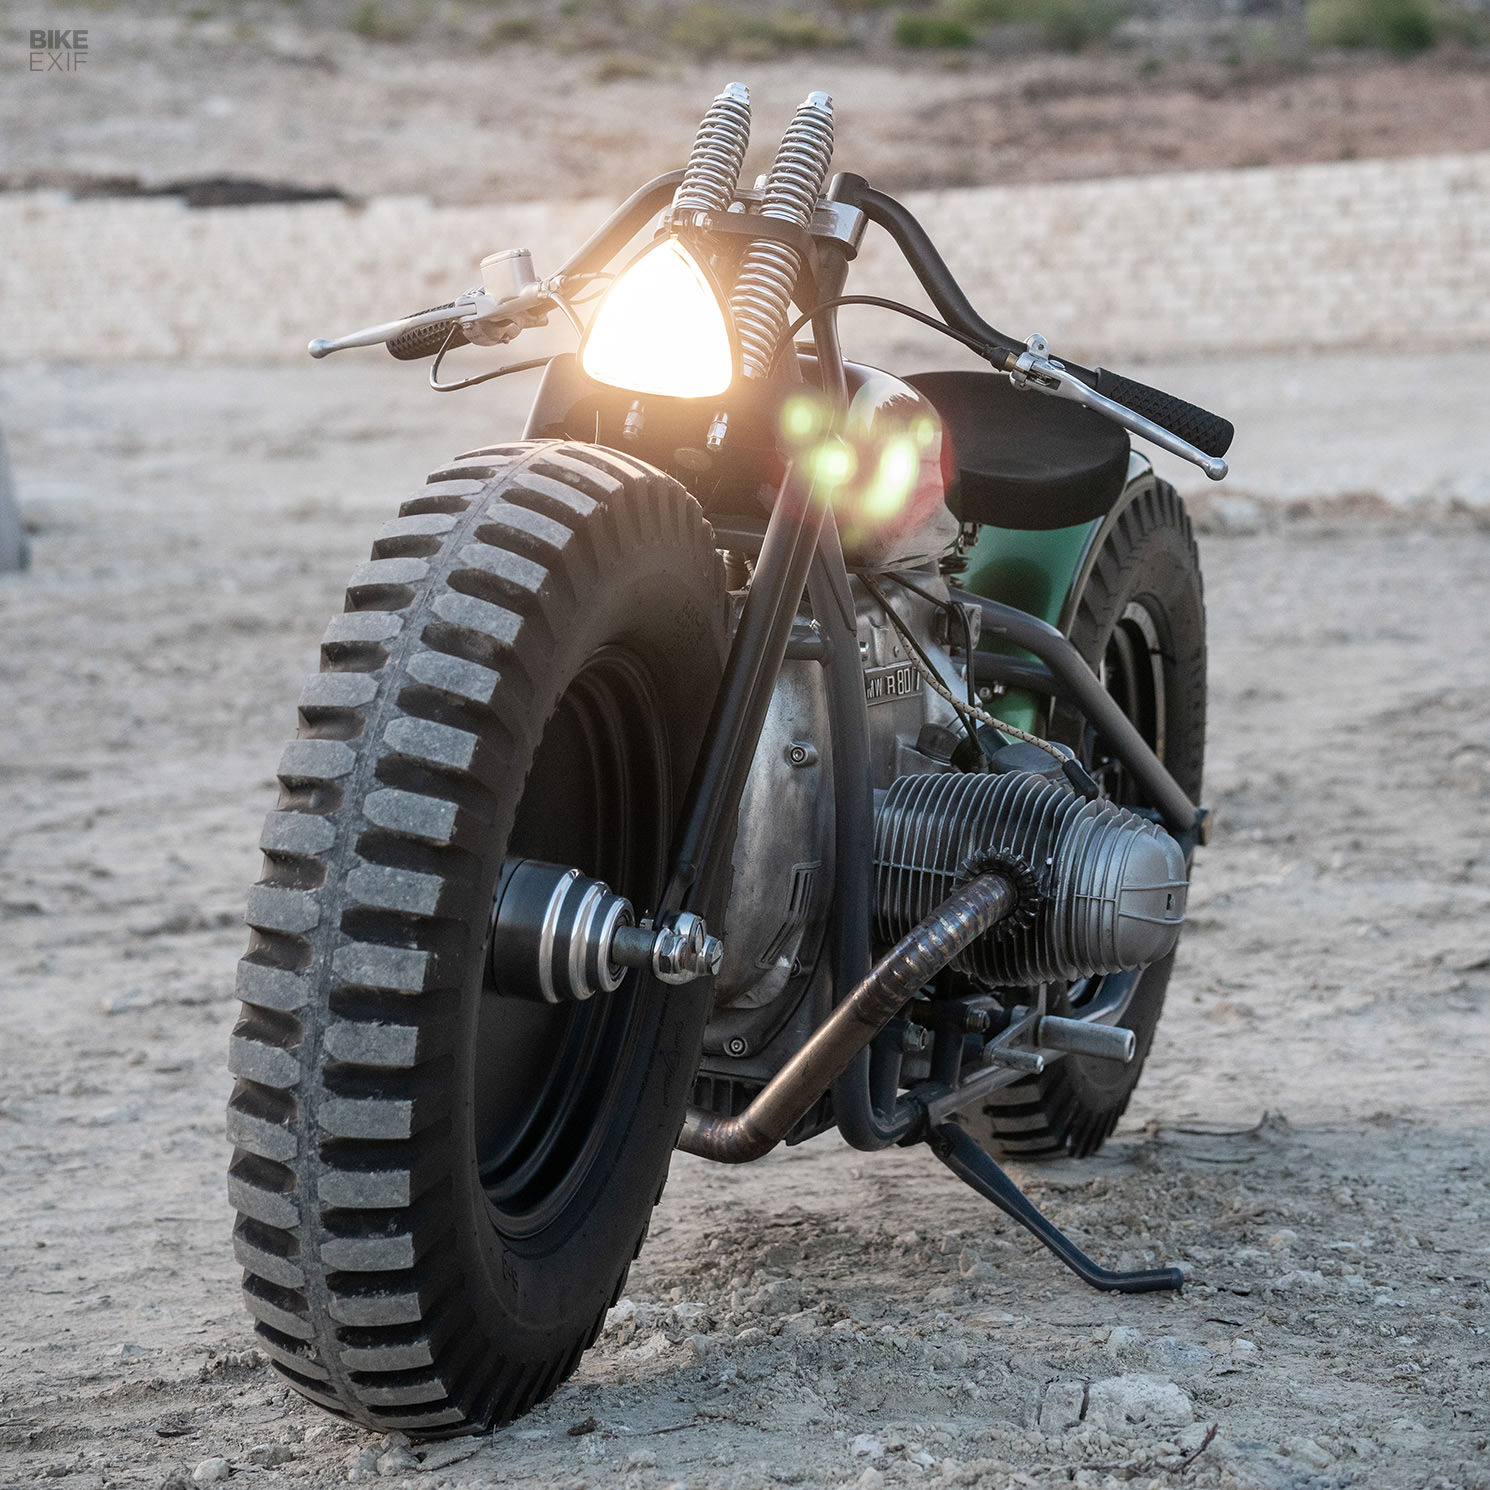 This Upcycled BMW R80 bobber is a real-life Tonka toy